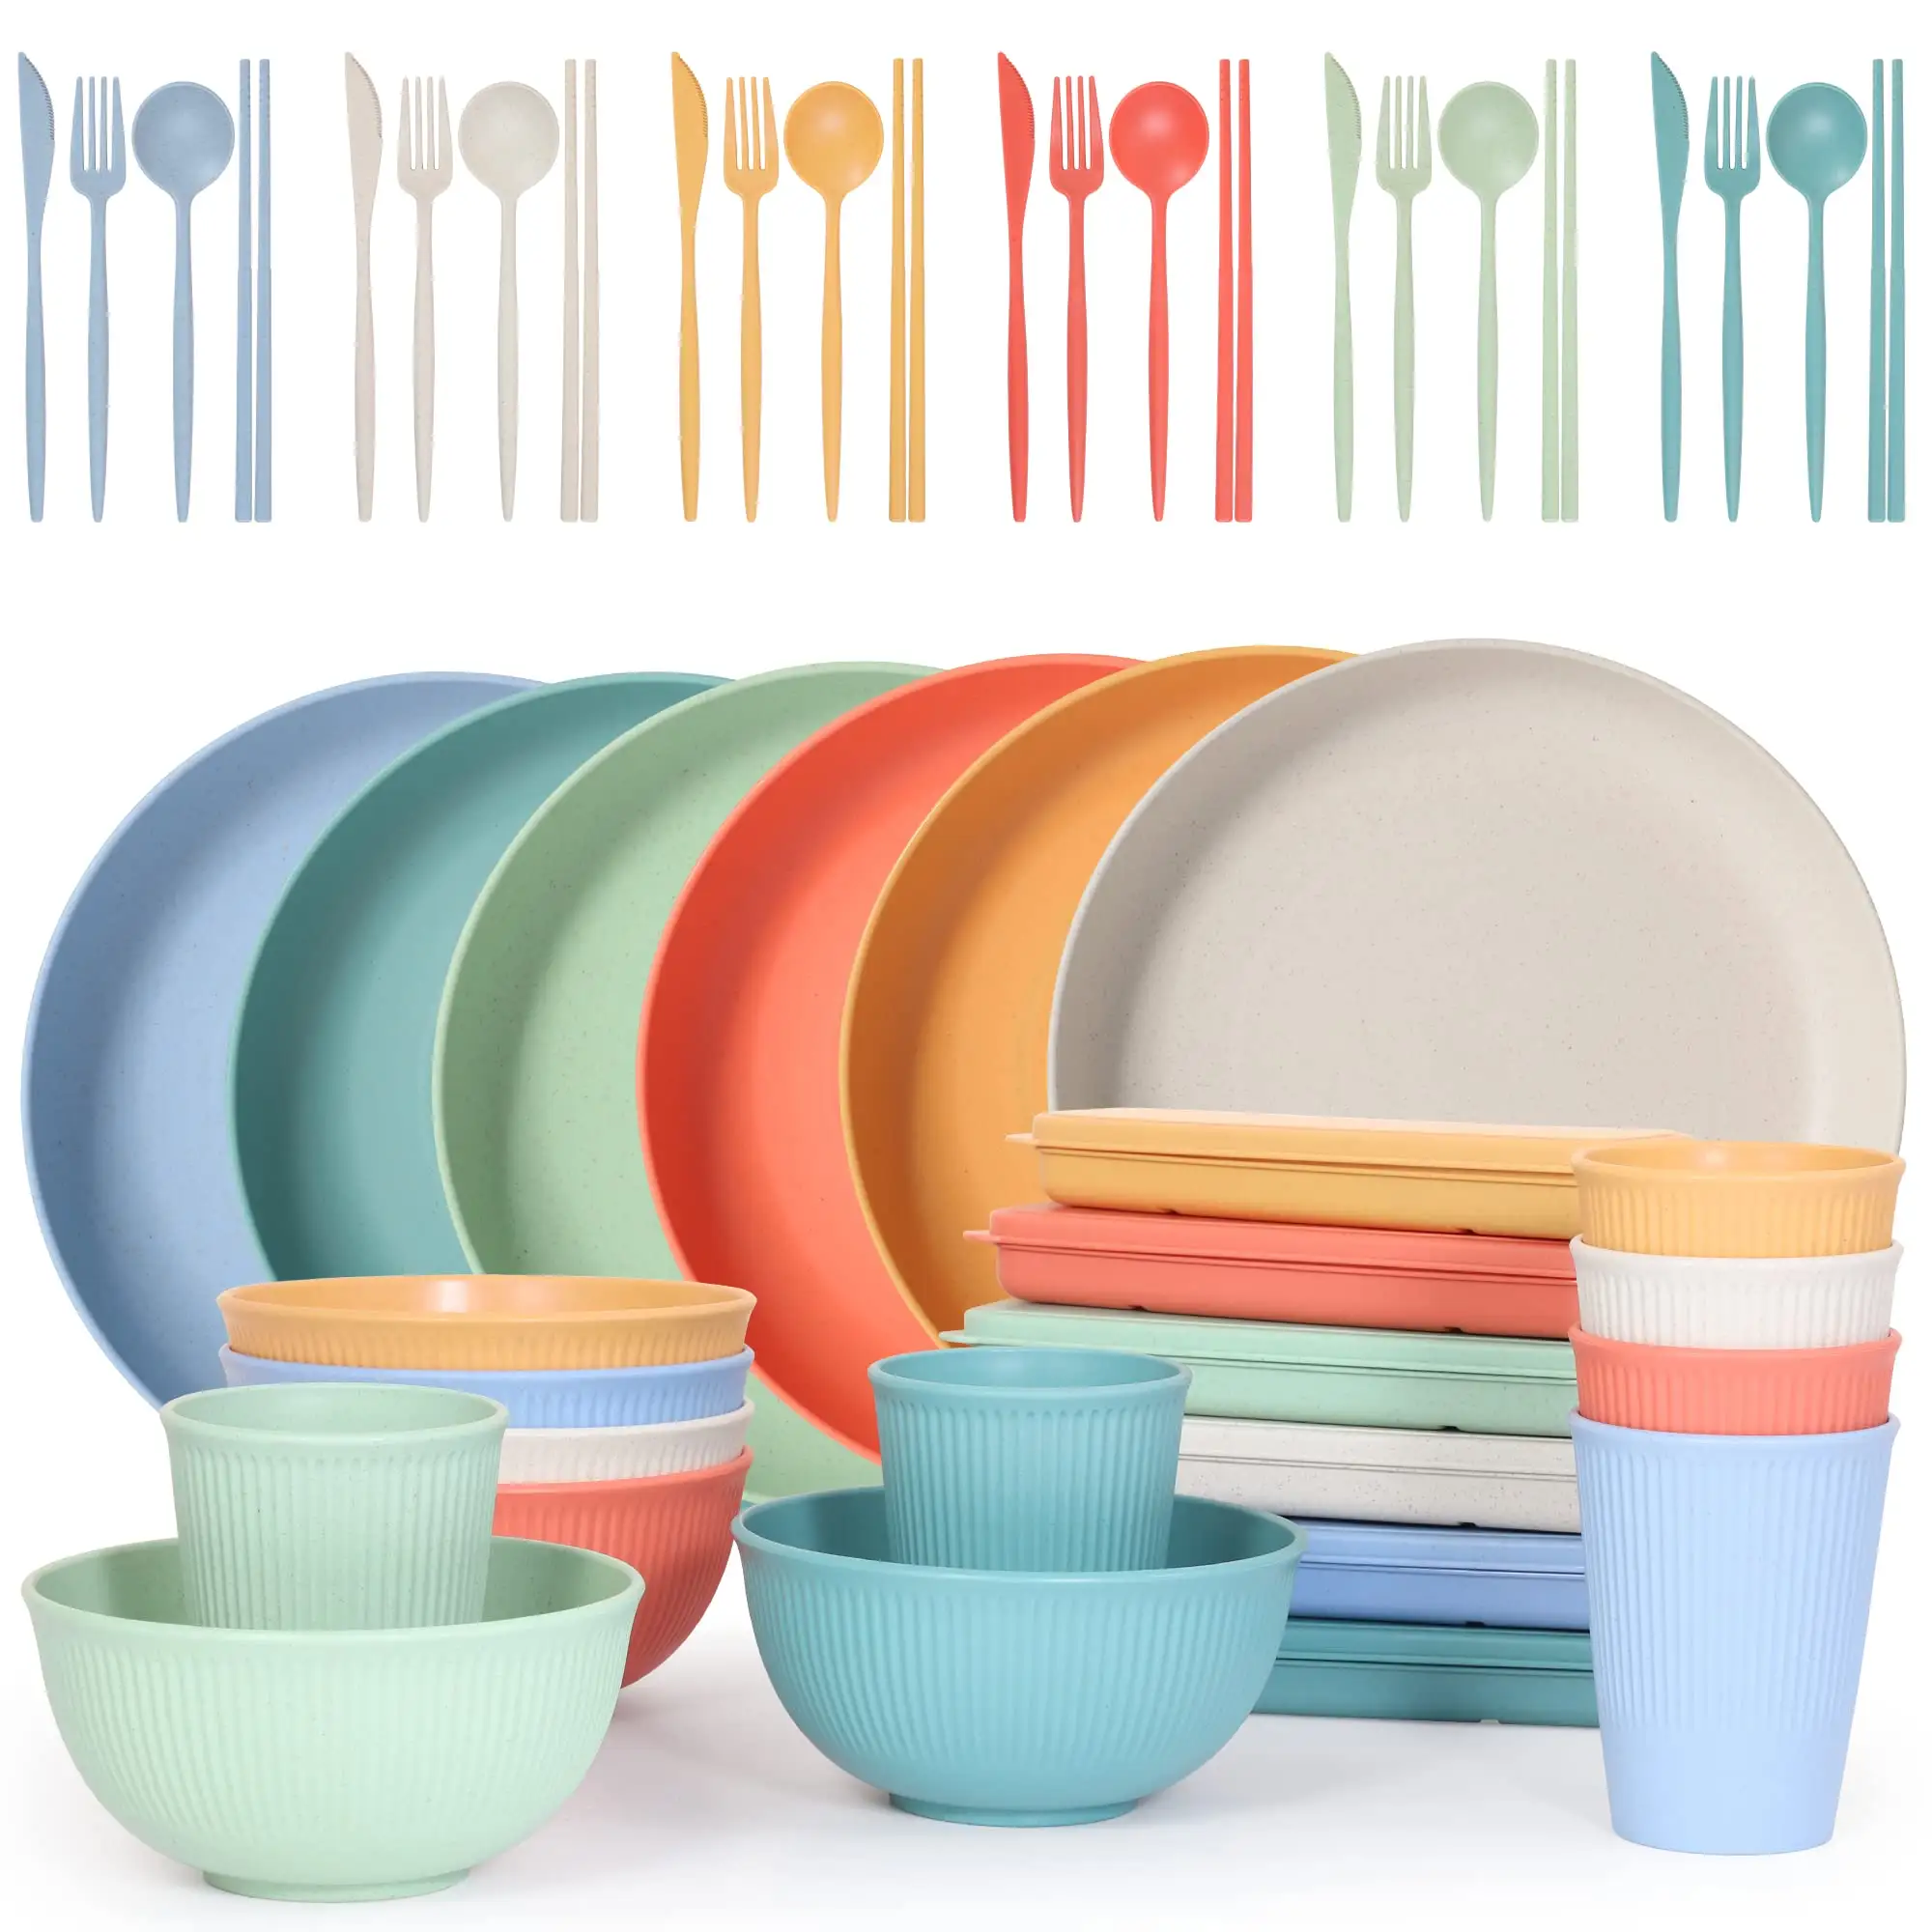 Microwave Safe Unbreakable Reusable Wheat Straw Plates Cups Bowls Tableware Sets Wheat Straw Dinnerware Set